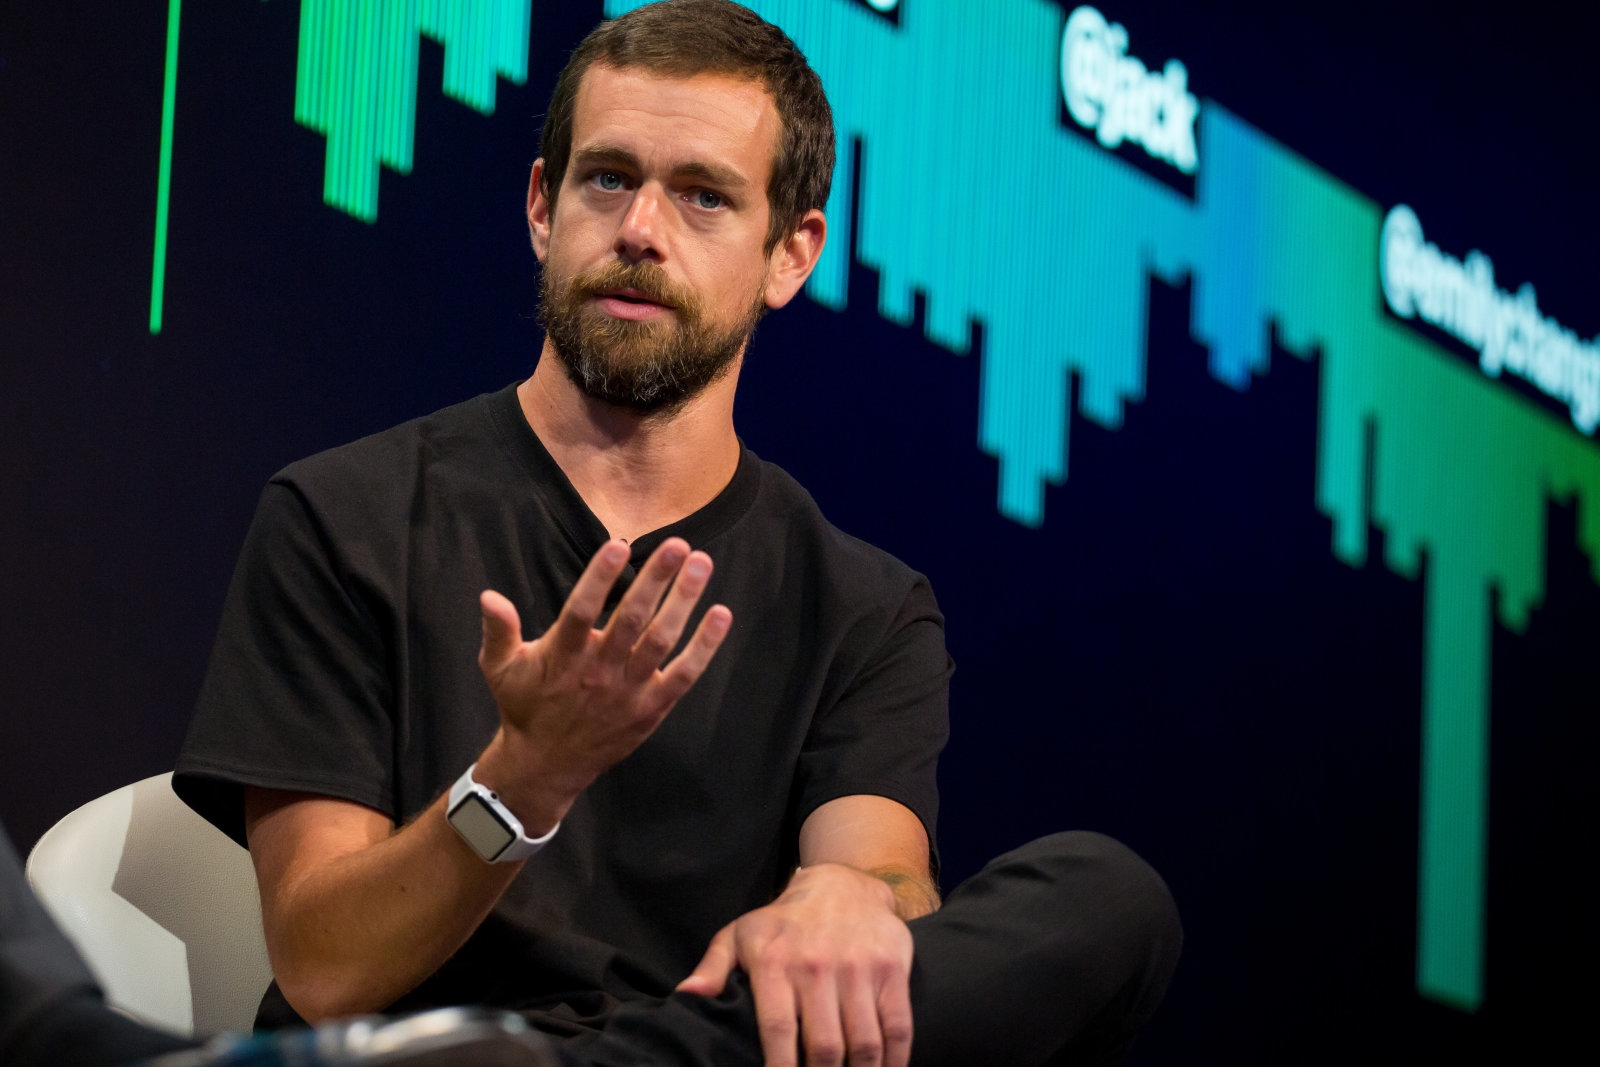 Jack Dorsey responds to #WomenBoycottTwitter: New rules incoming | DeviceDaily.com